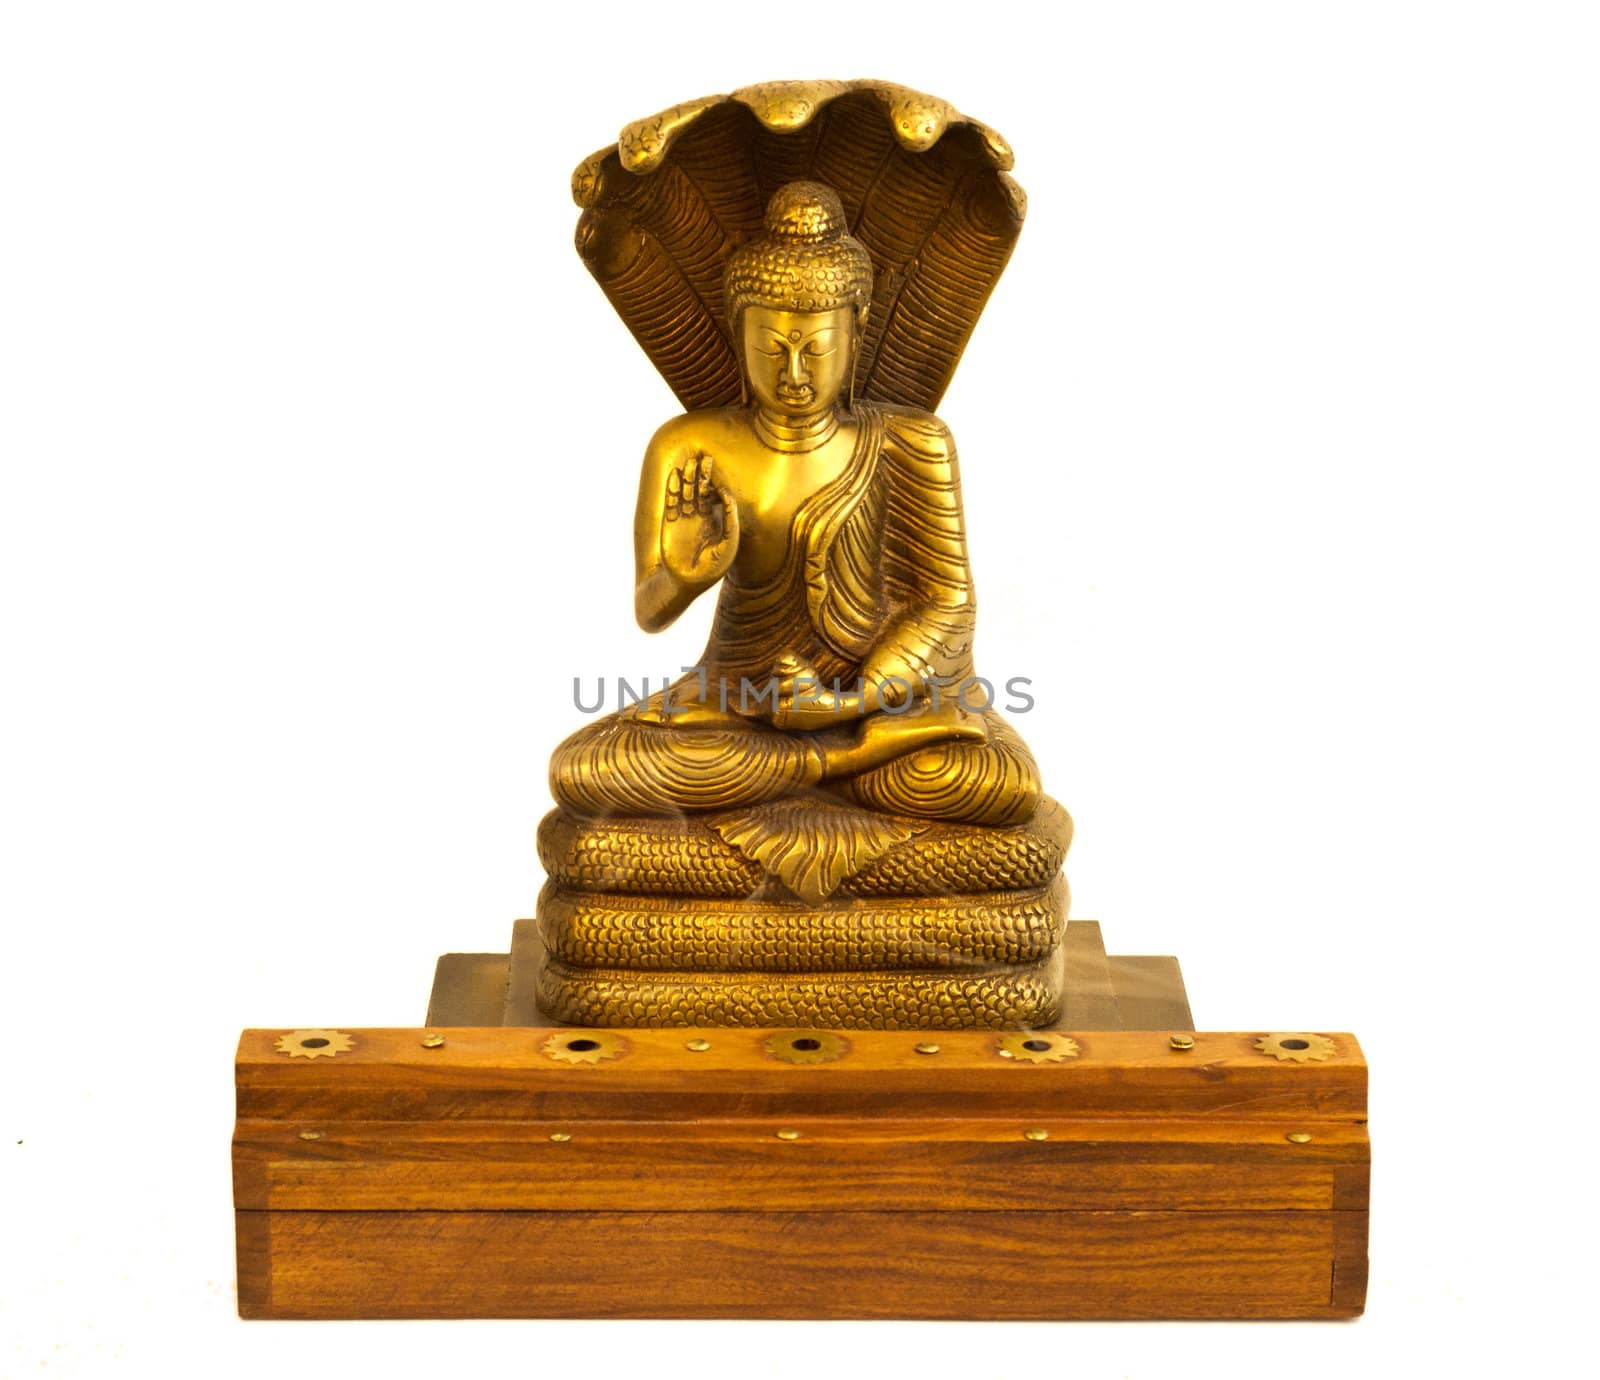 A buddha statue with incense burning in front.